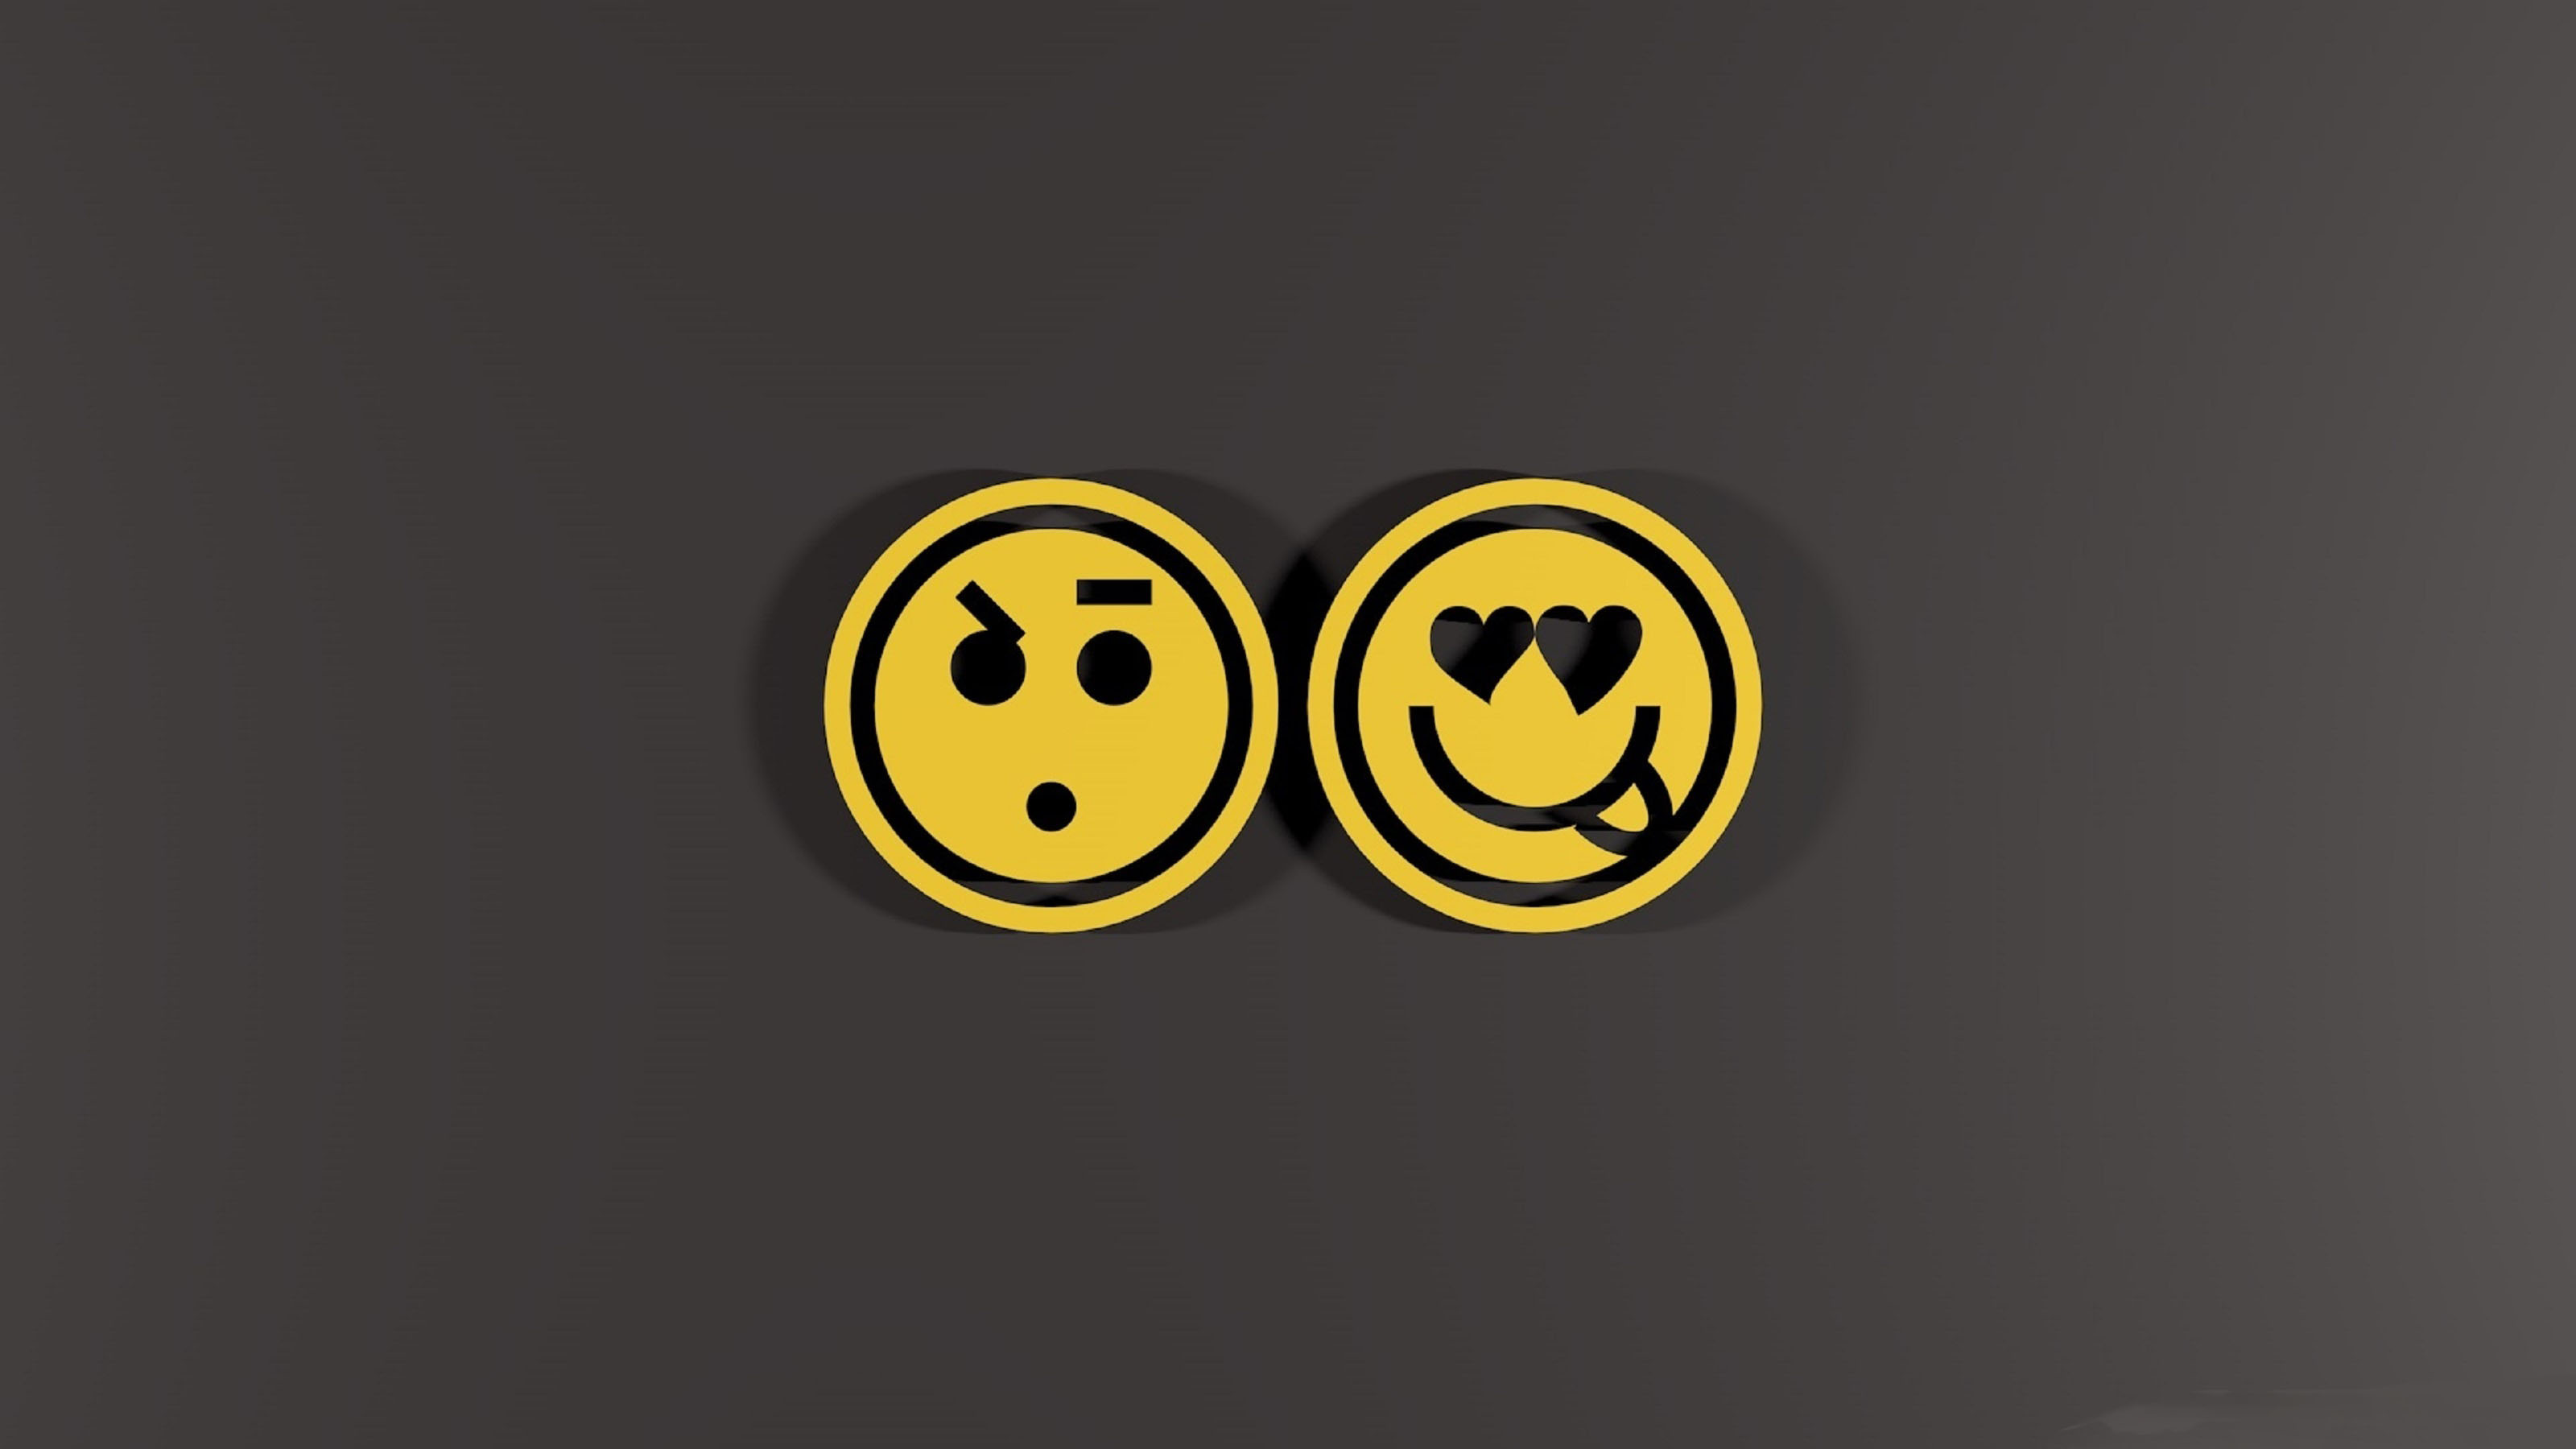 Smiley Emoji Zipper Themes HD Wallpapers 3D icons Apk Download for Android-  Latest version 1.0- com.live.wallpaper.free.background.phone.launcher.theme. smiley.emoji.zipper